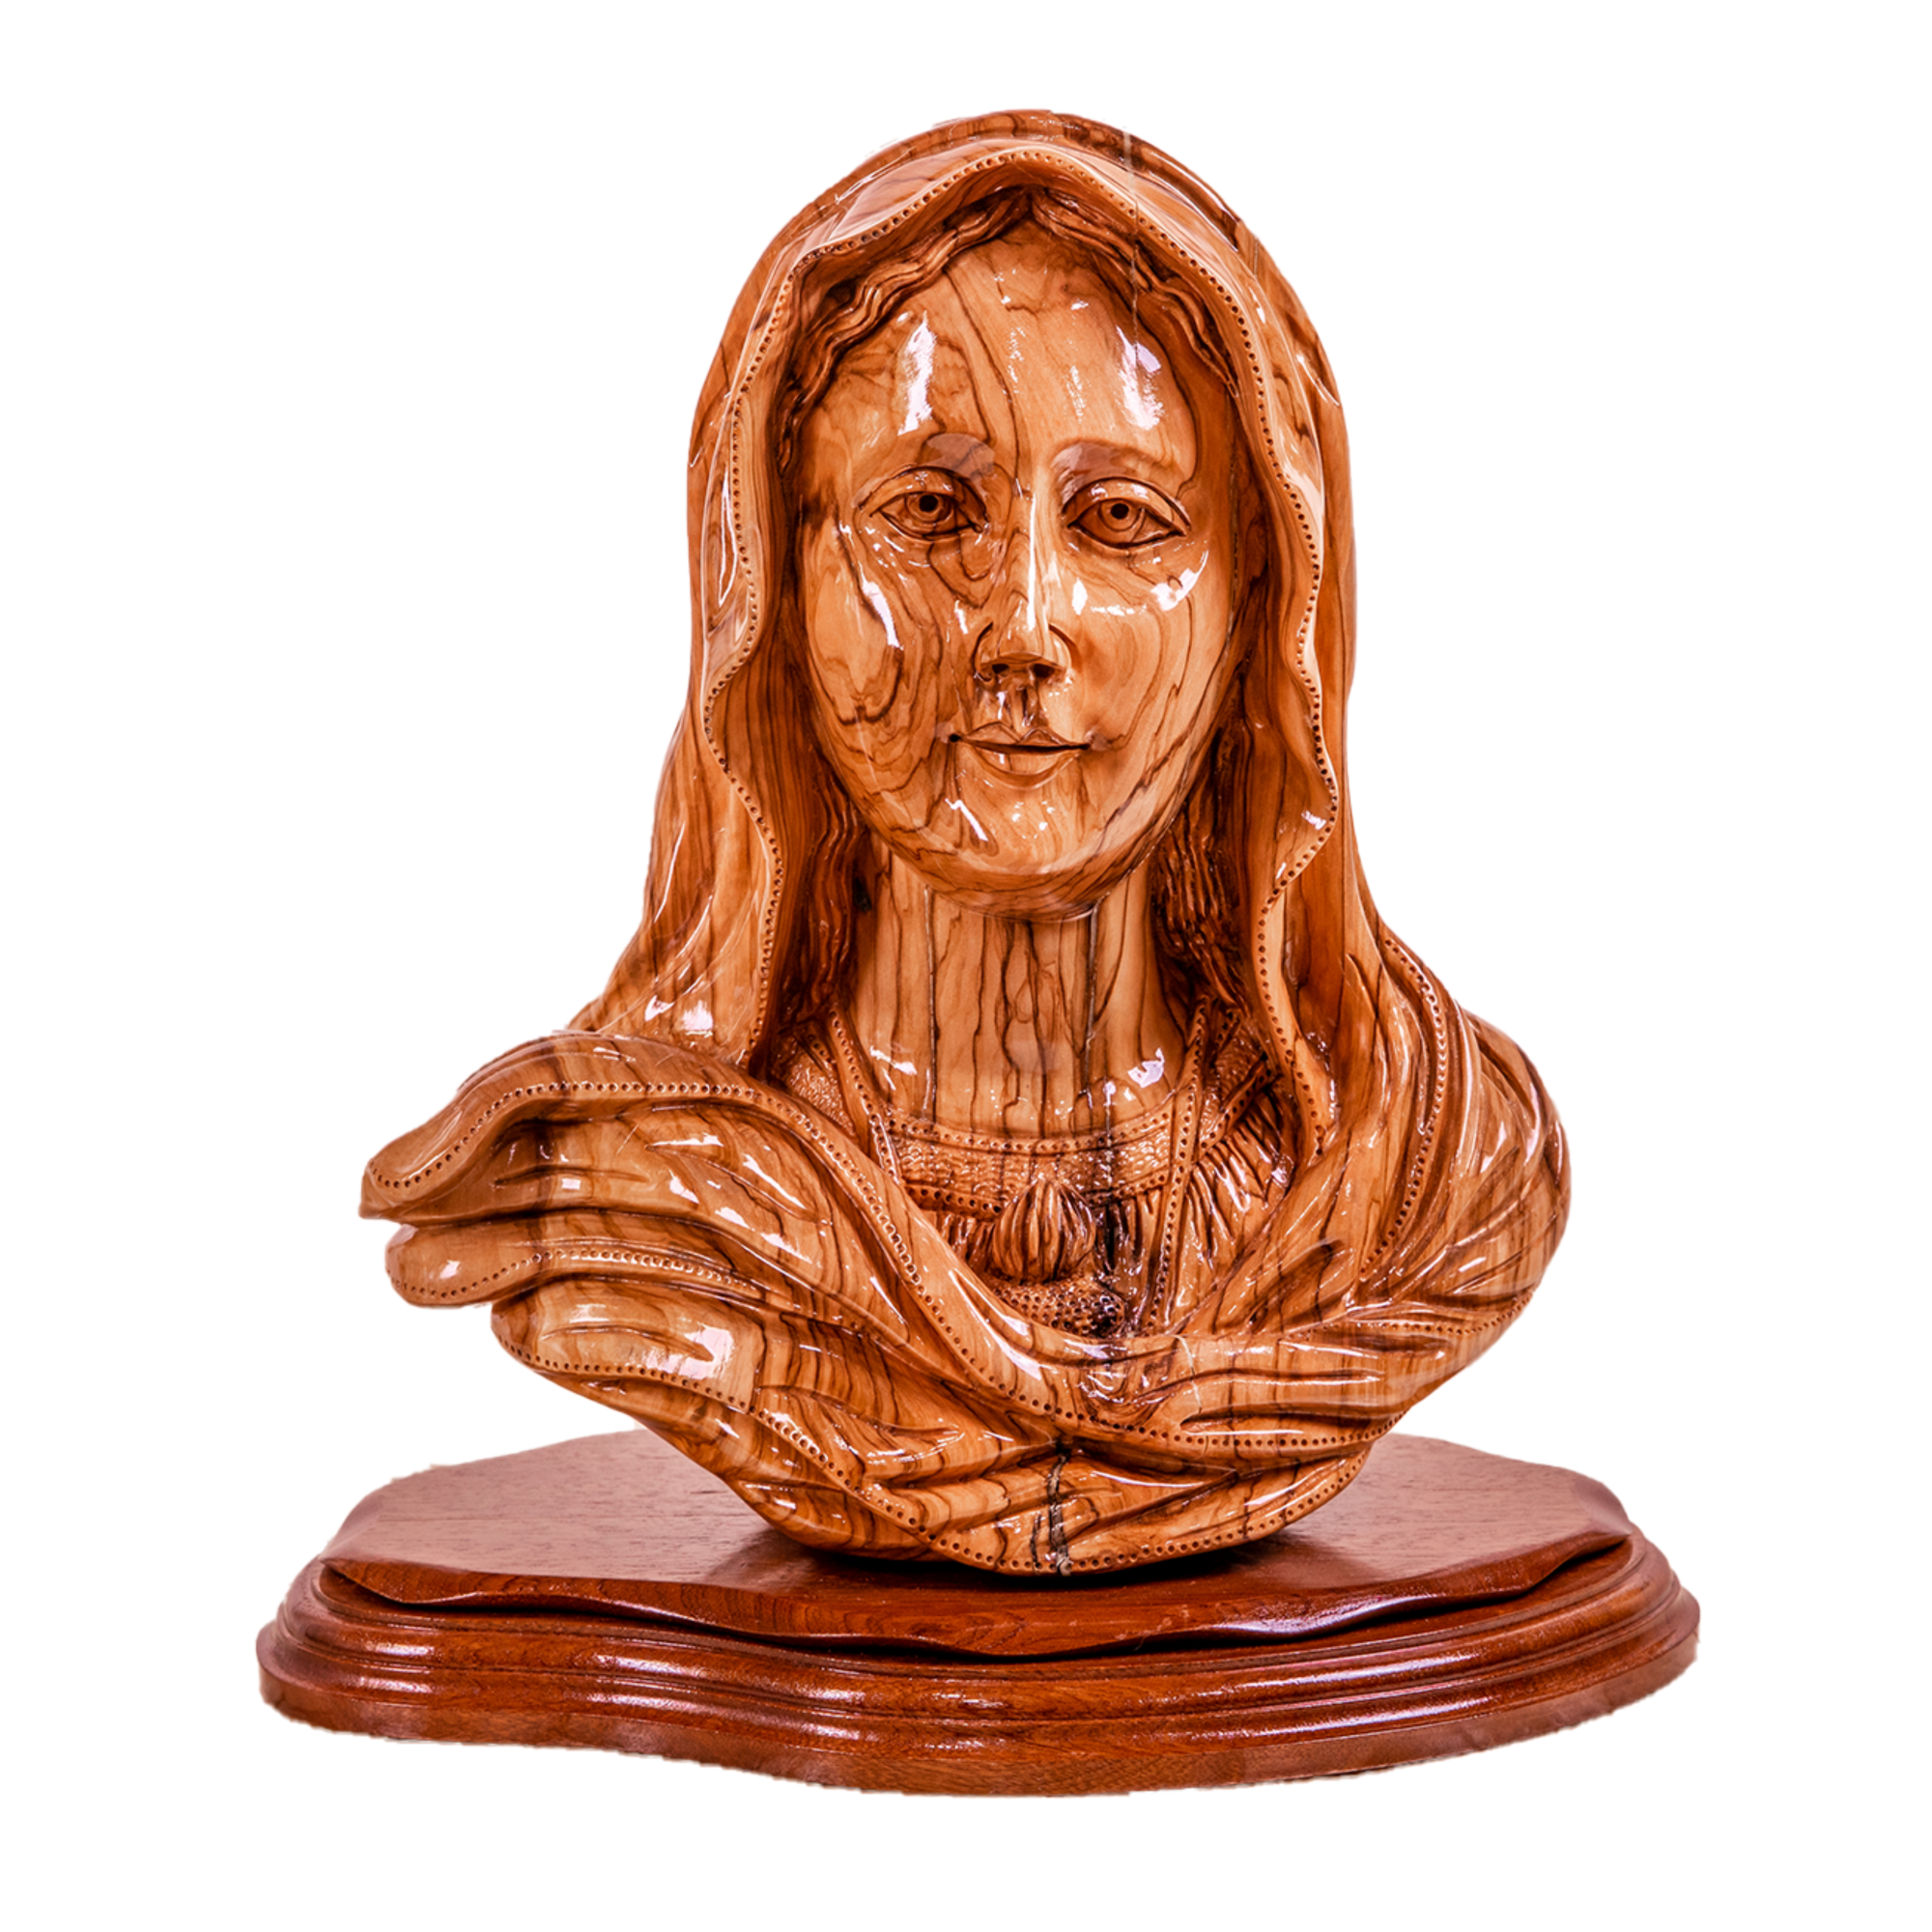 Bust of Mary, Size: 13.8"/35 cm Height